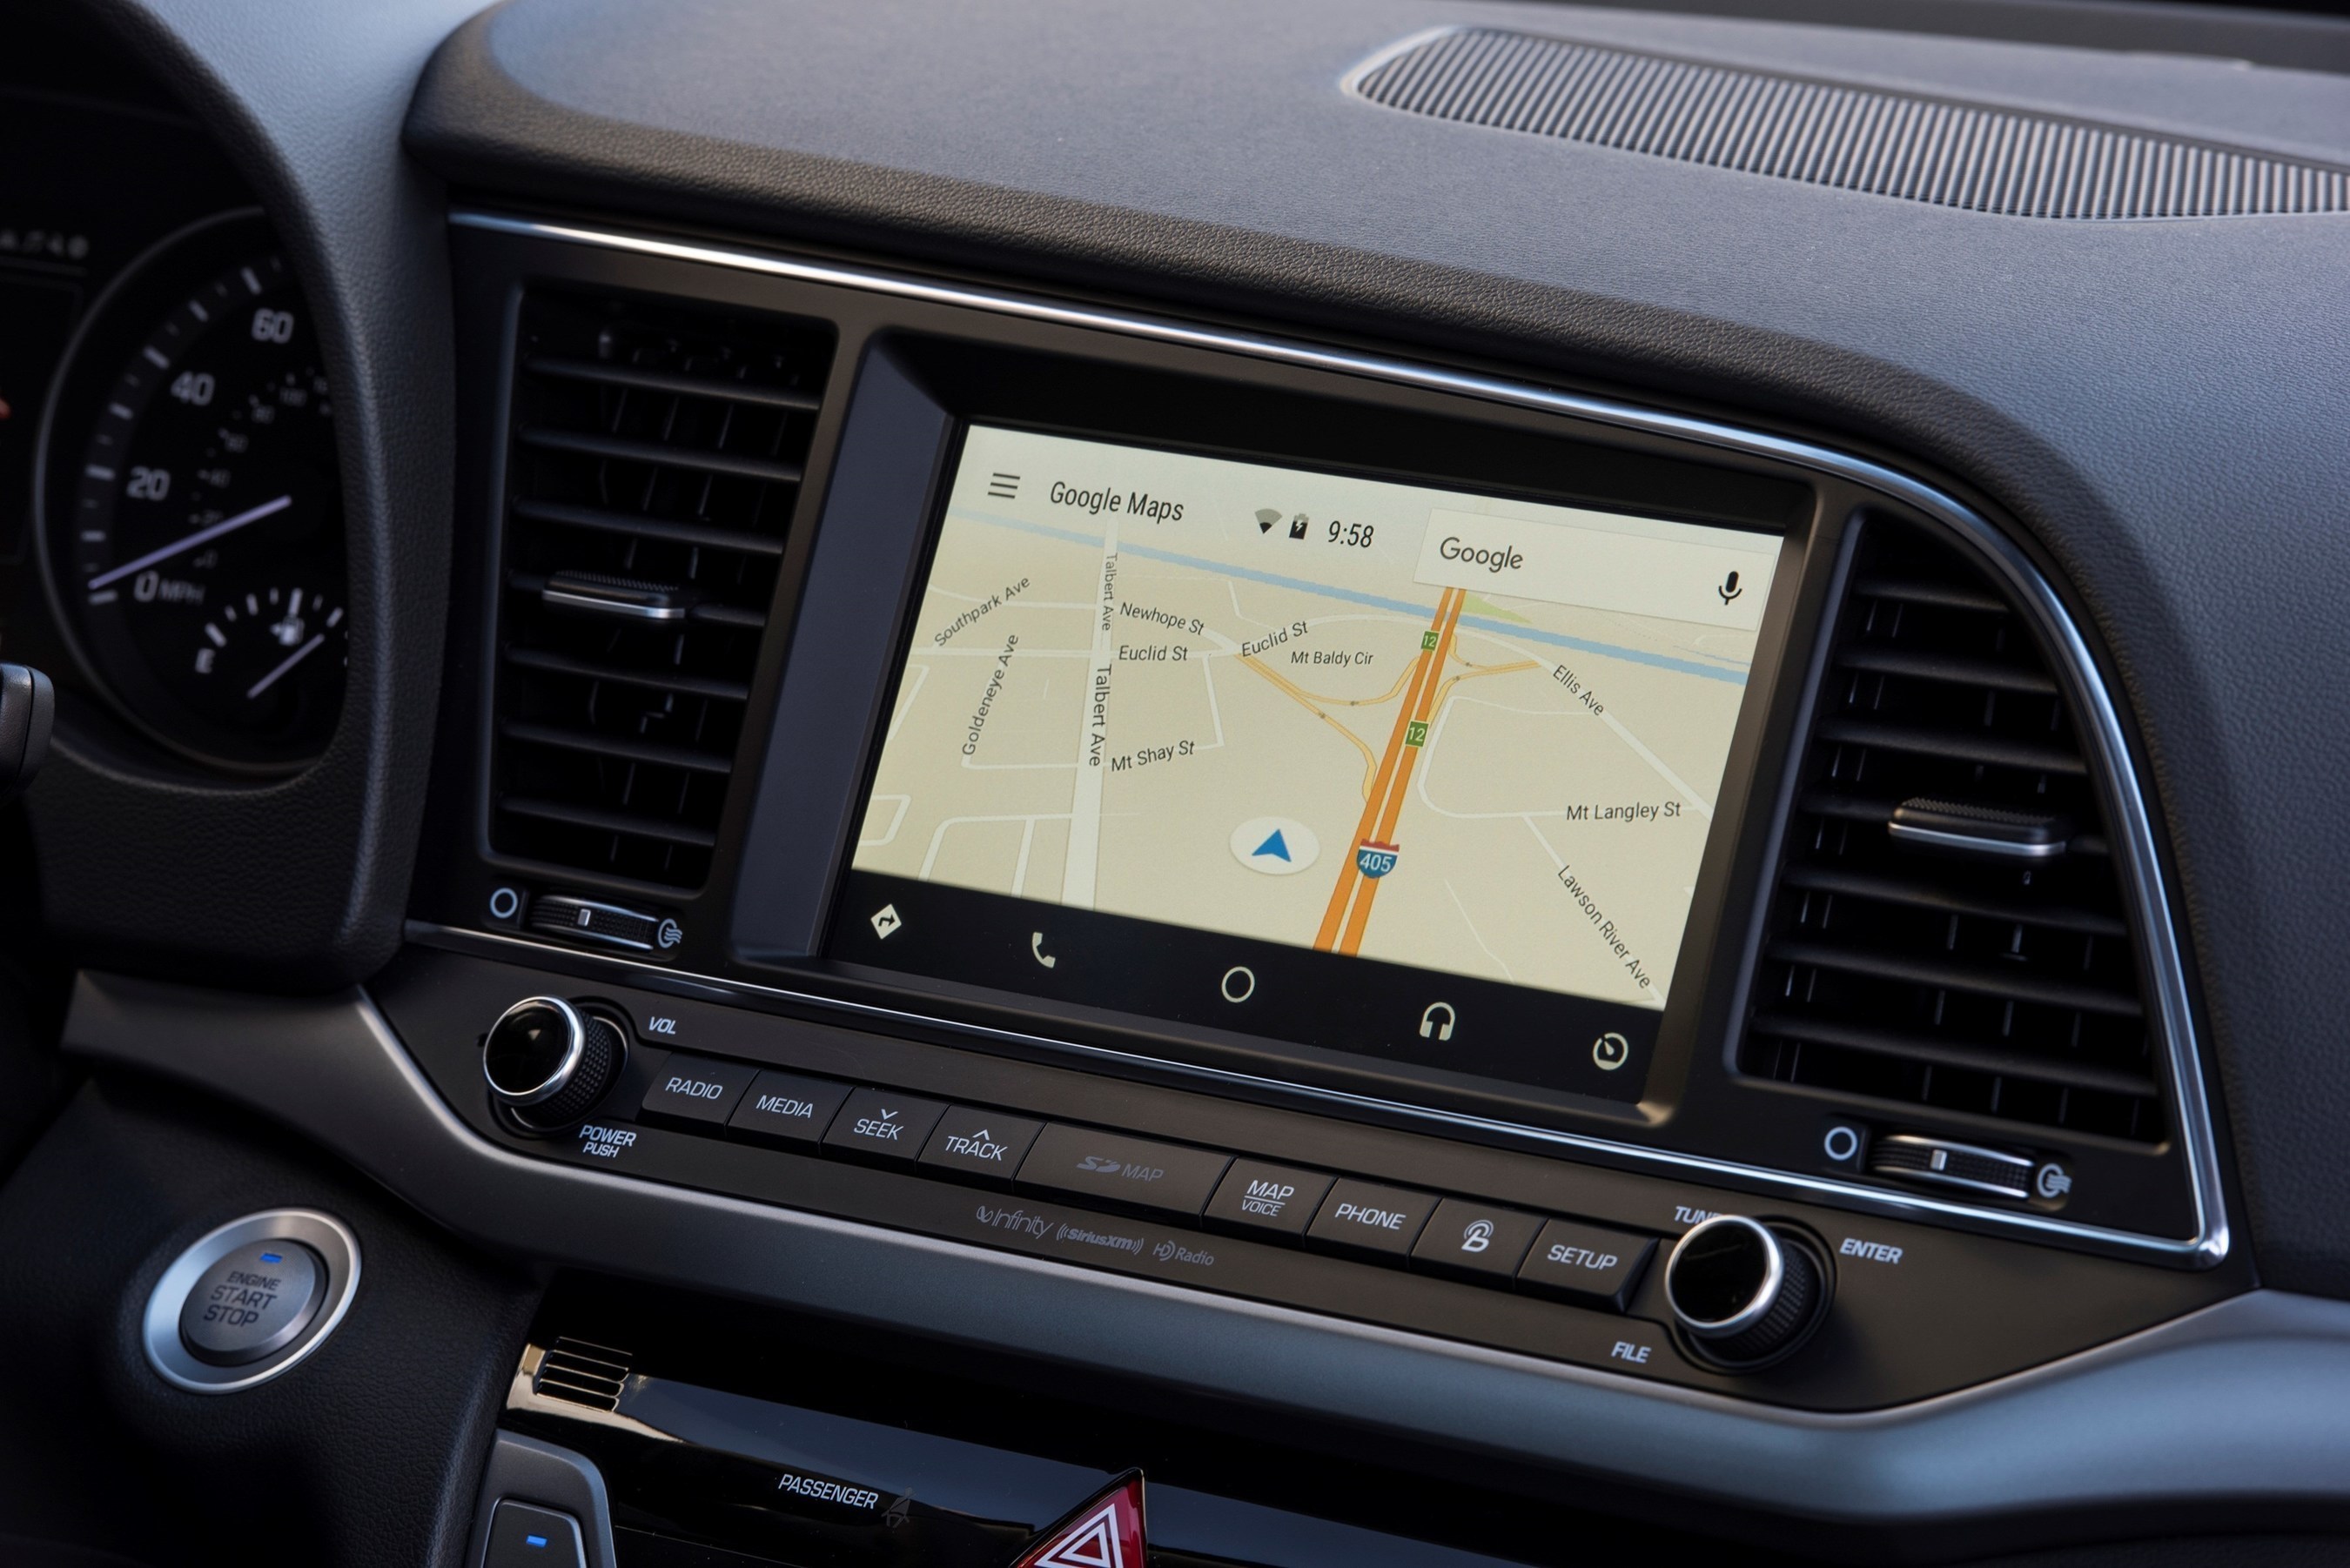 Hyundai is adding smartphone integrations to several more existing models today, via do-it-yourself installation and now has completed the rollout of smartphone integration across the 2017 model year lineup. The software update compatible with CarPlay and Android Auto is now available at no cost through MyHyundai.com (www.myhyundai.com). The software will also be available at Hyundai dealerships nationwide for an installation fee.